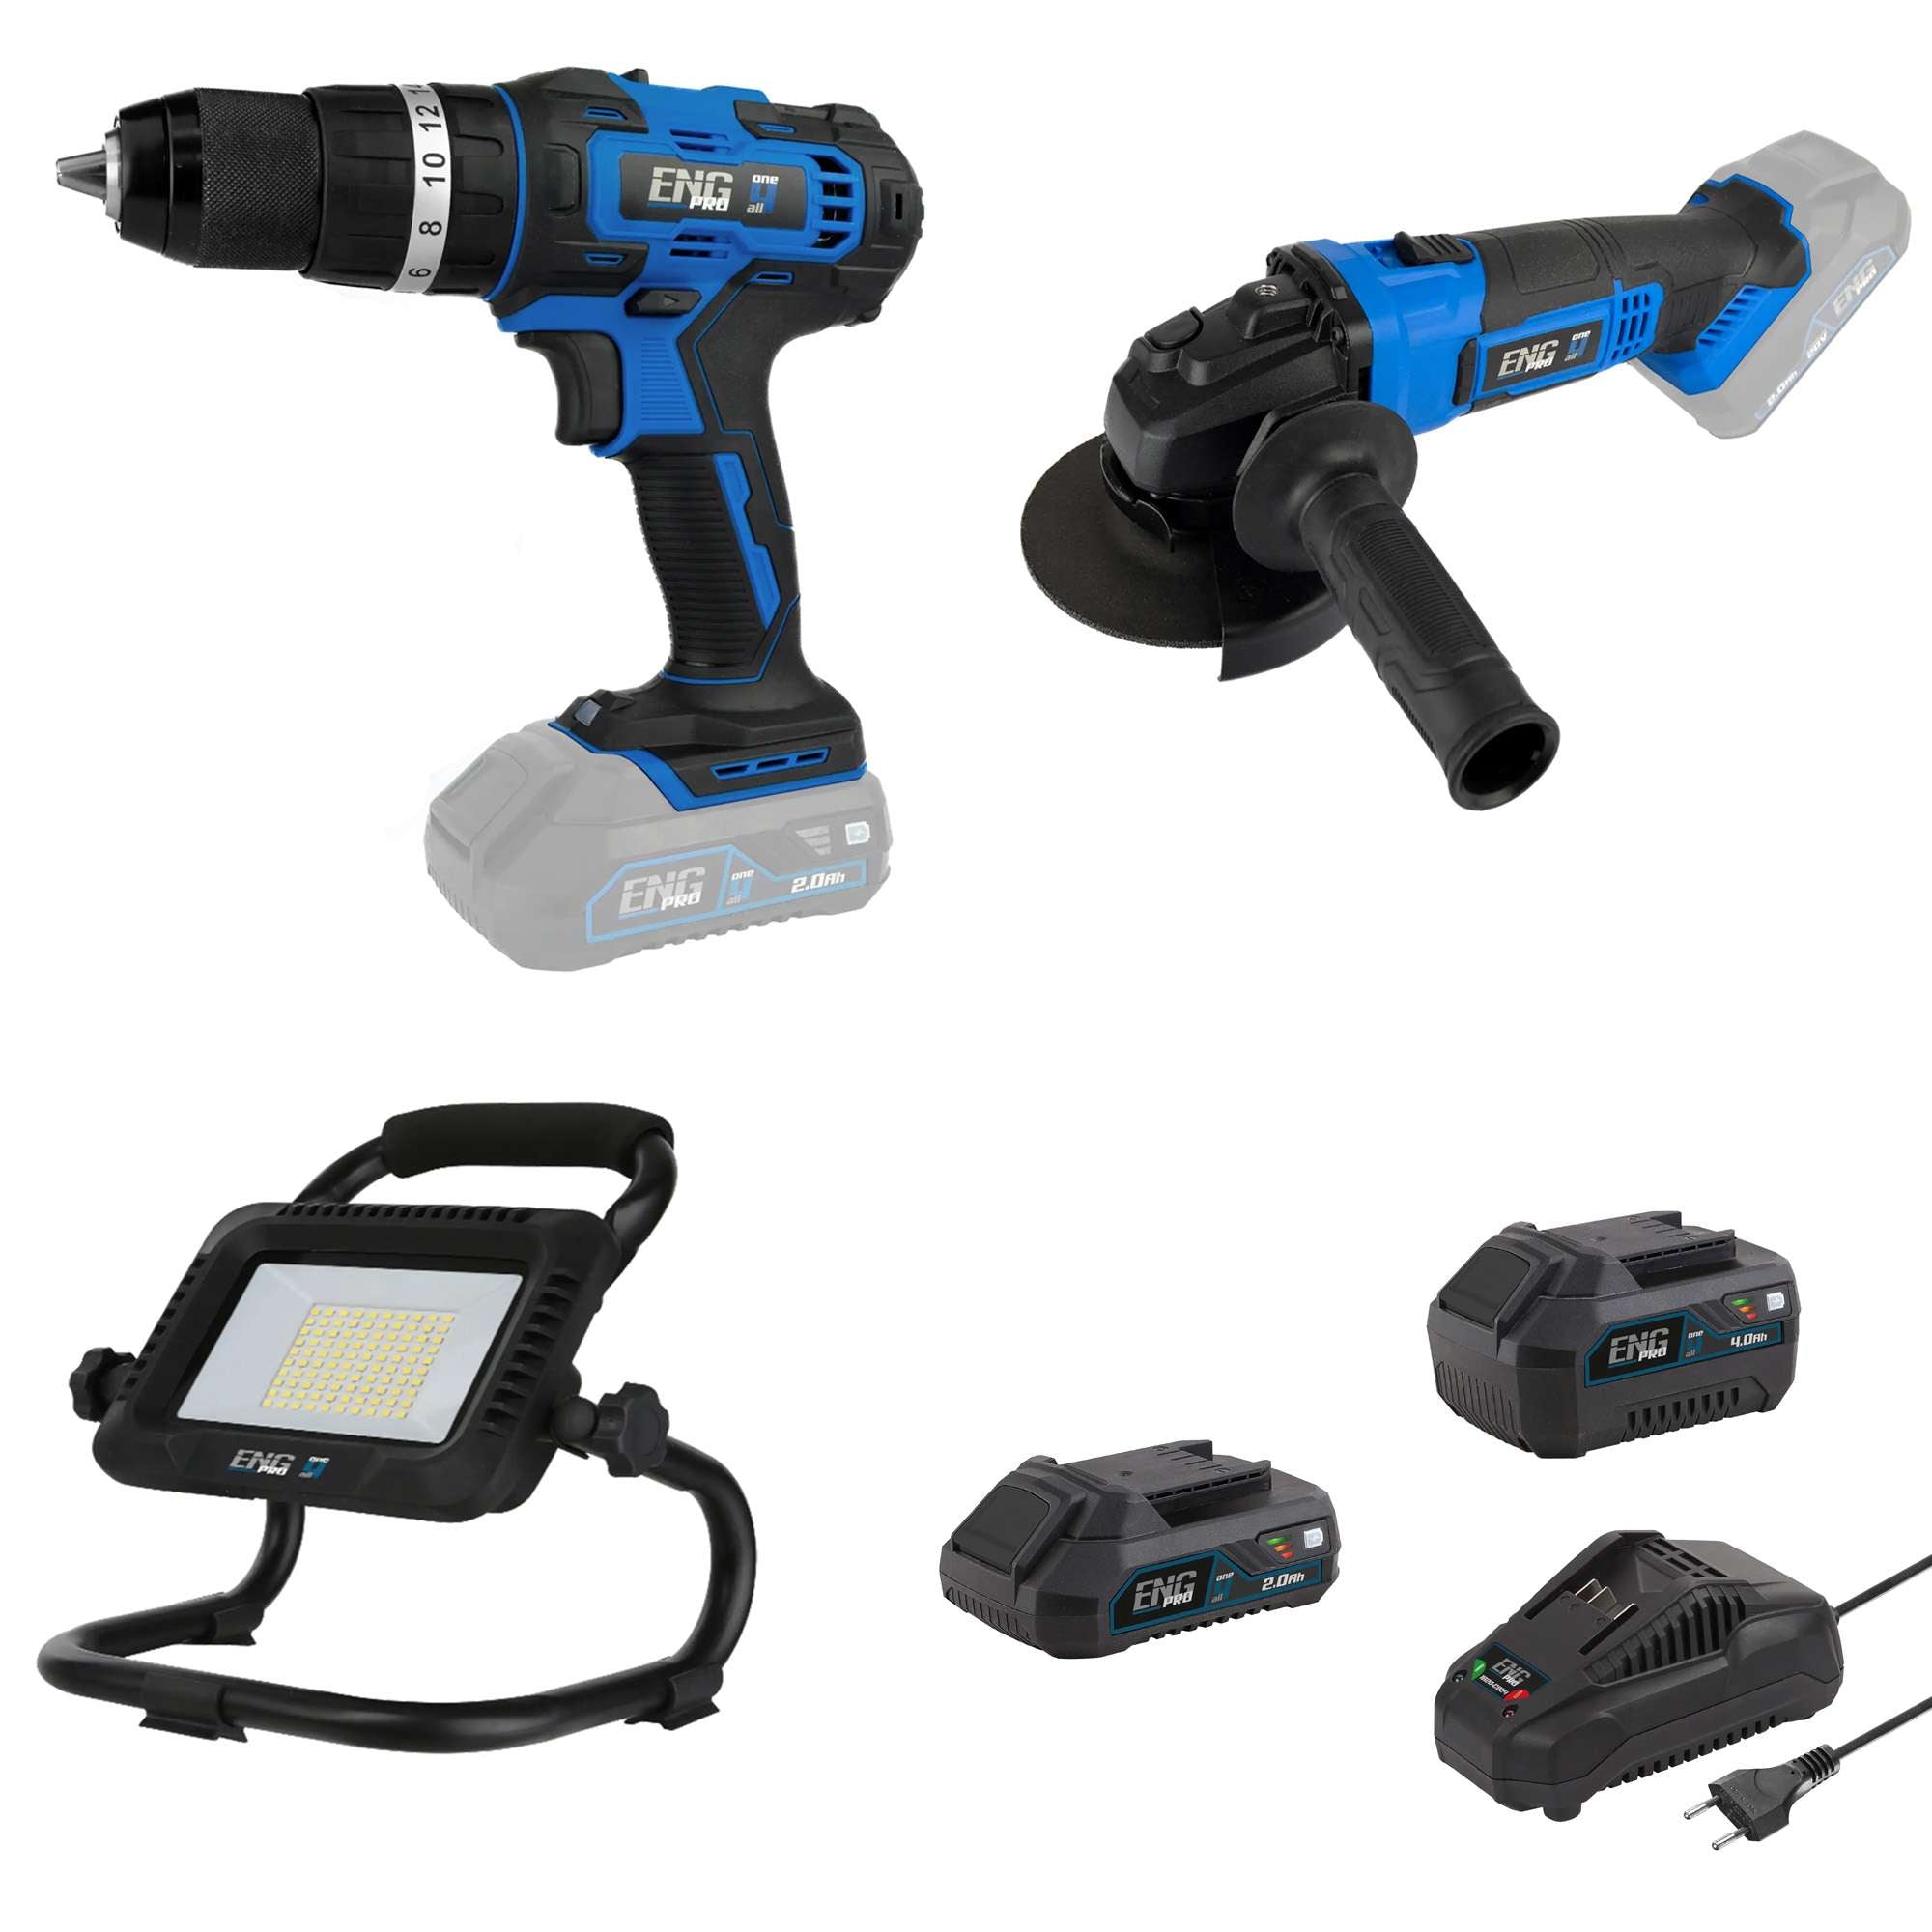 Hammer drill driver, Angle Grinder, Cordless Work light and 2 Batteries 2/4.0 Ah